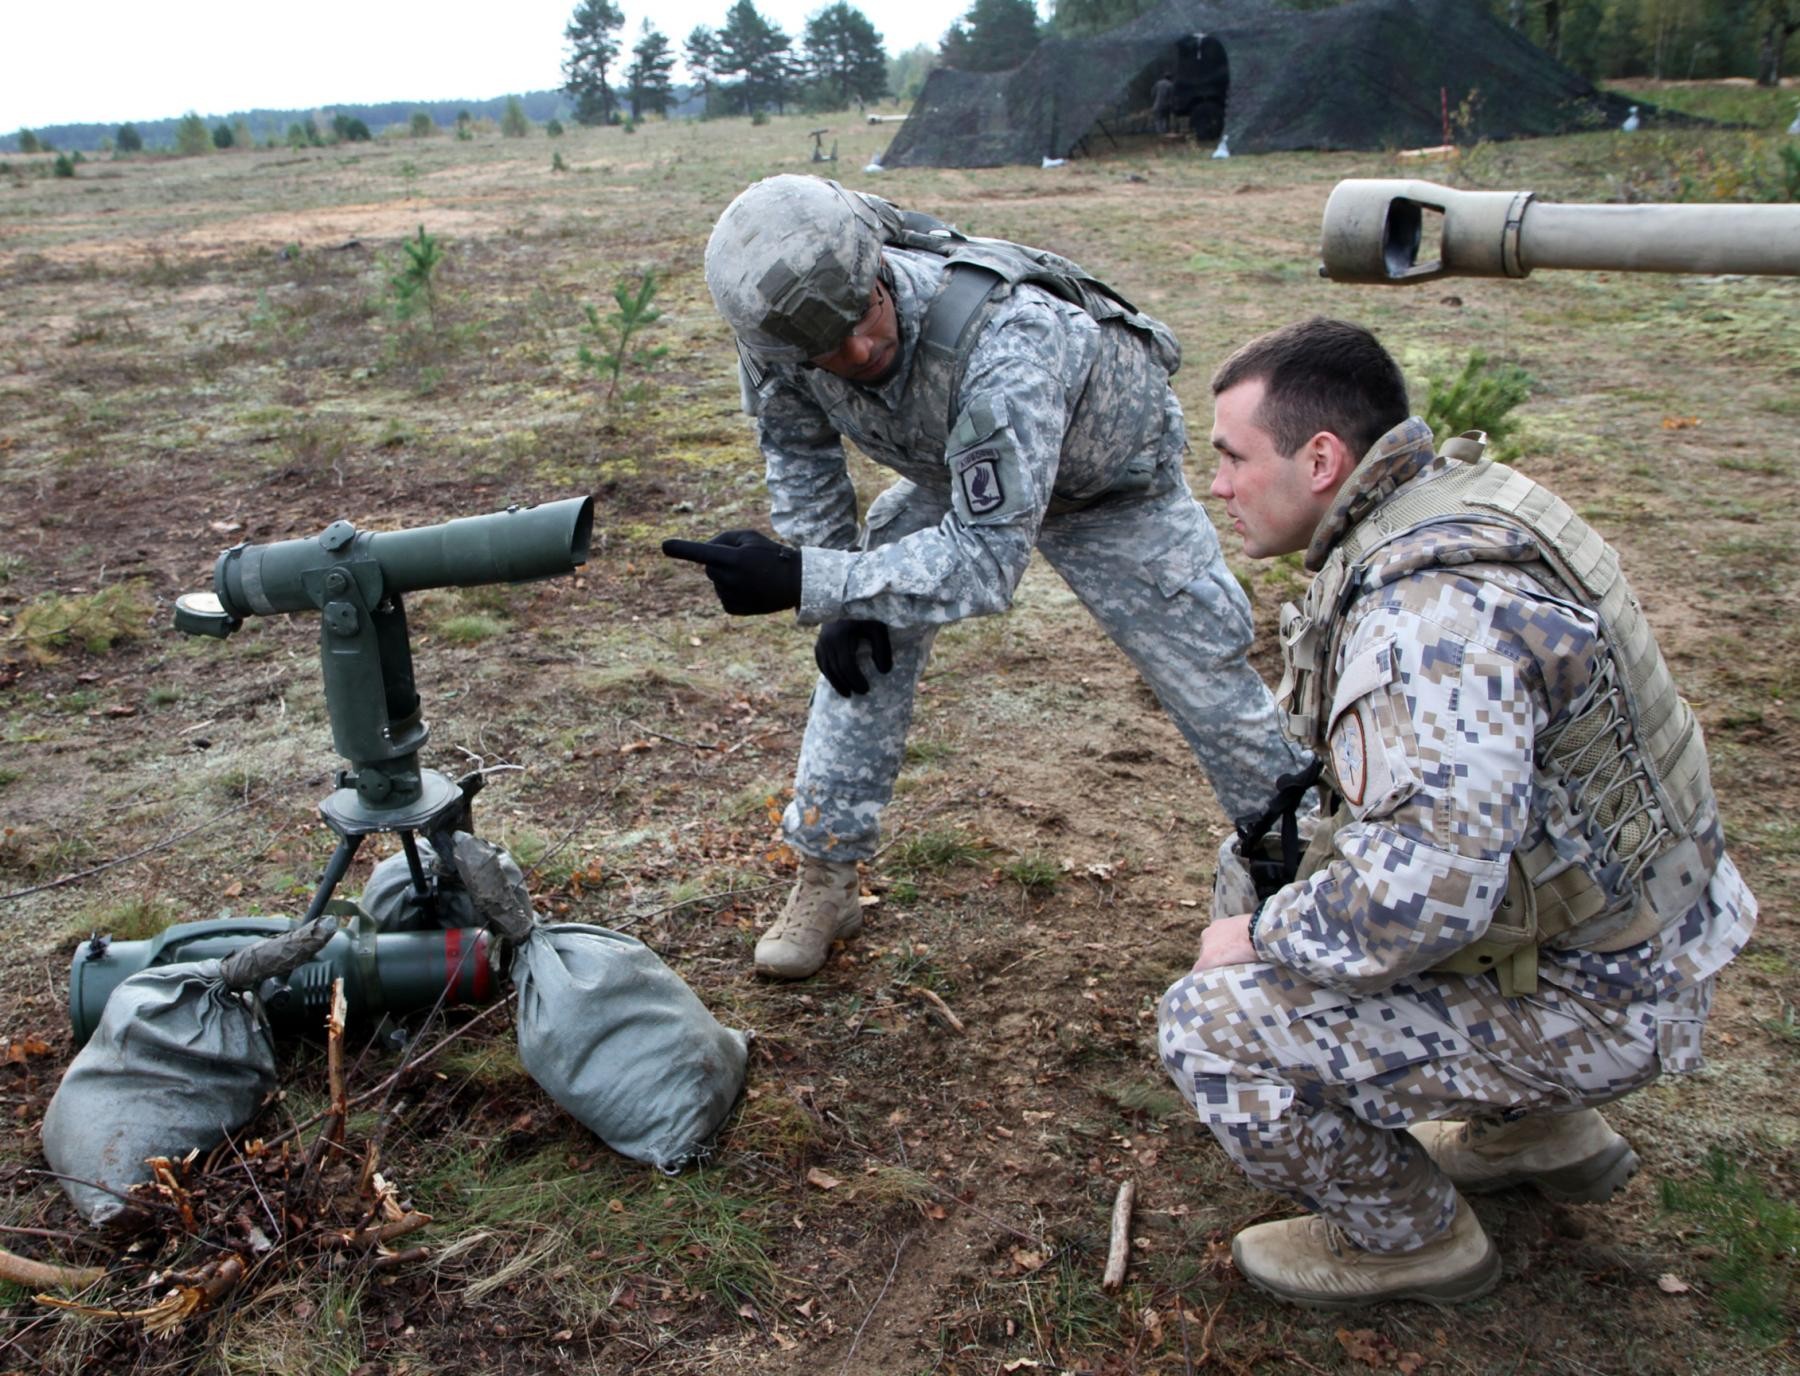 173rd Airborne Brigade 'shows off' equipment to the Latvian Land Force